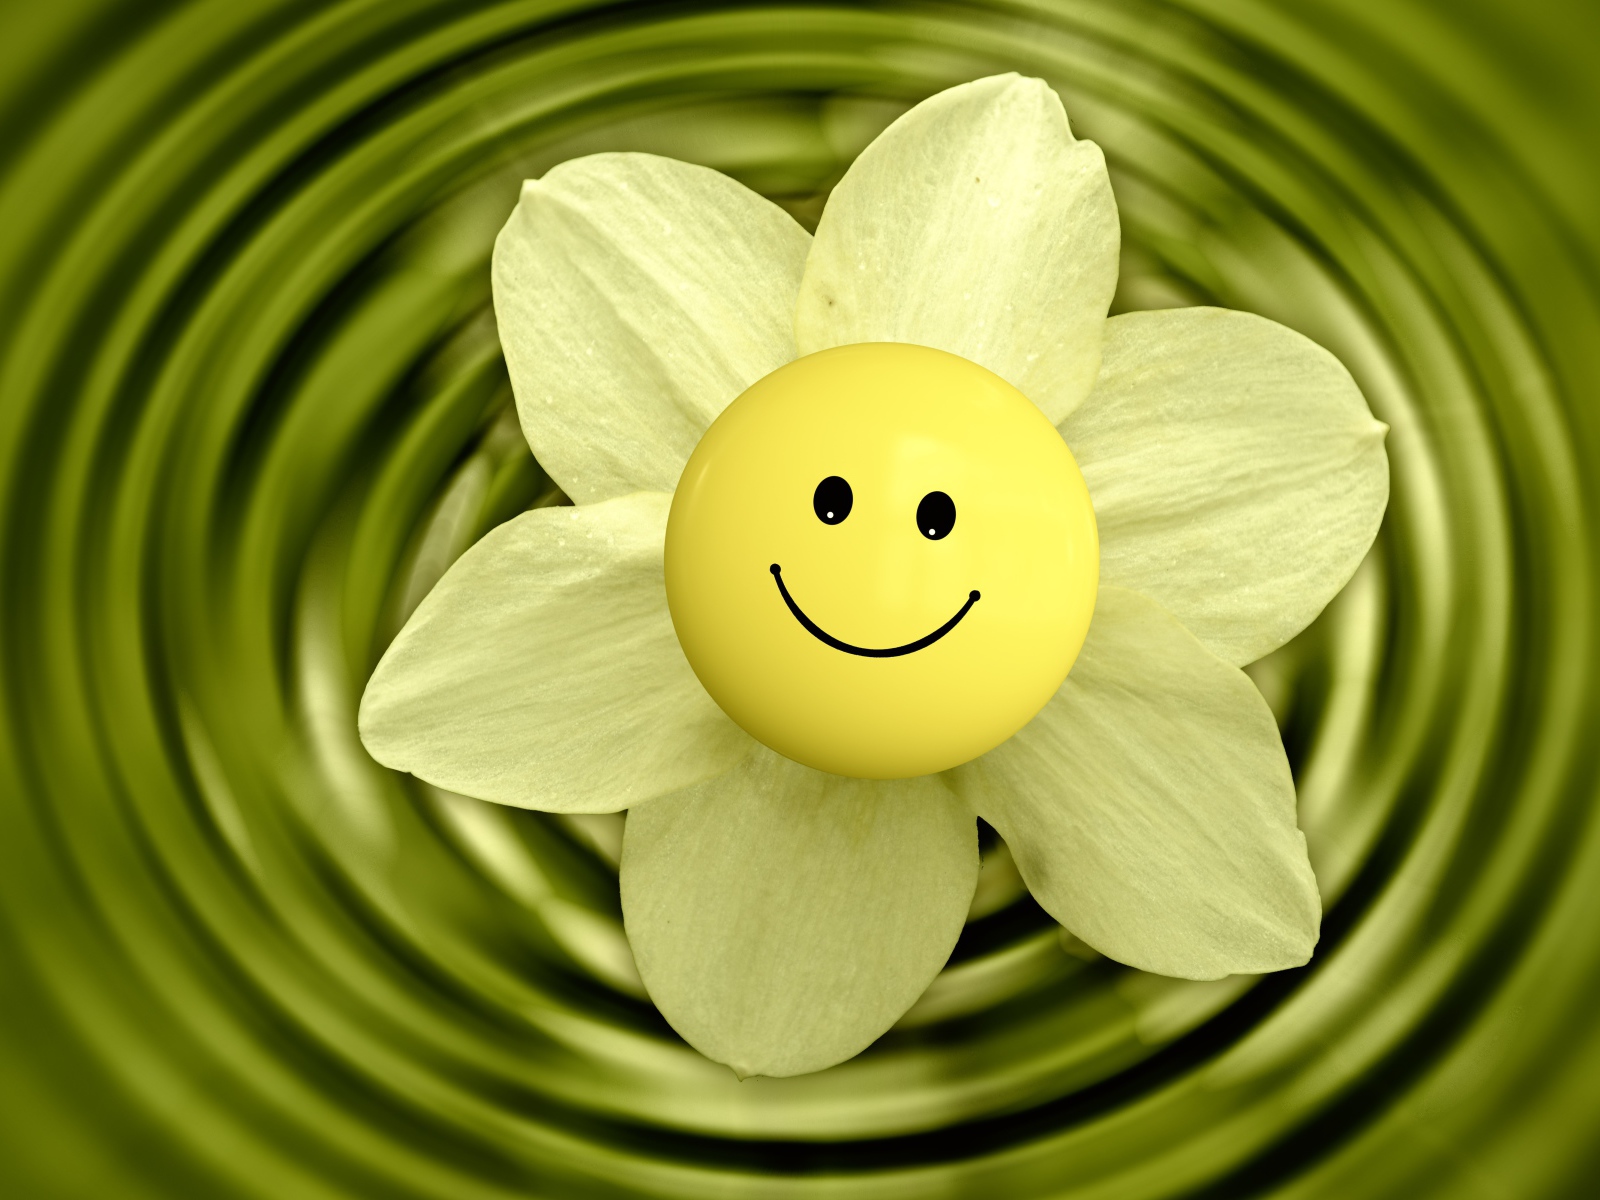 Narcissus flower with smiley face in water